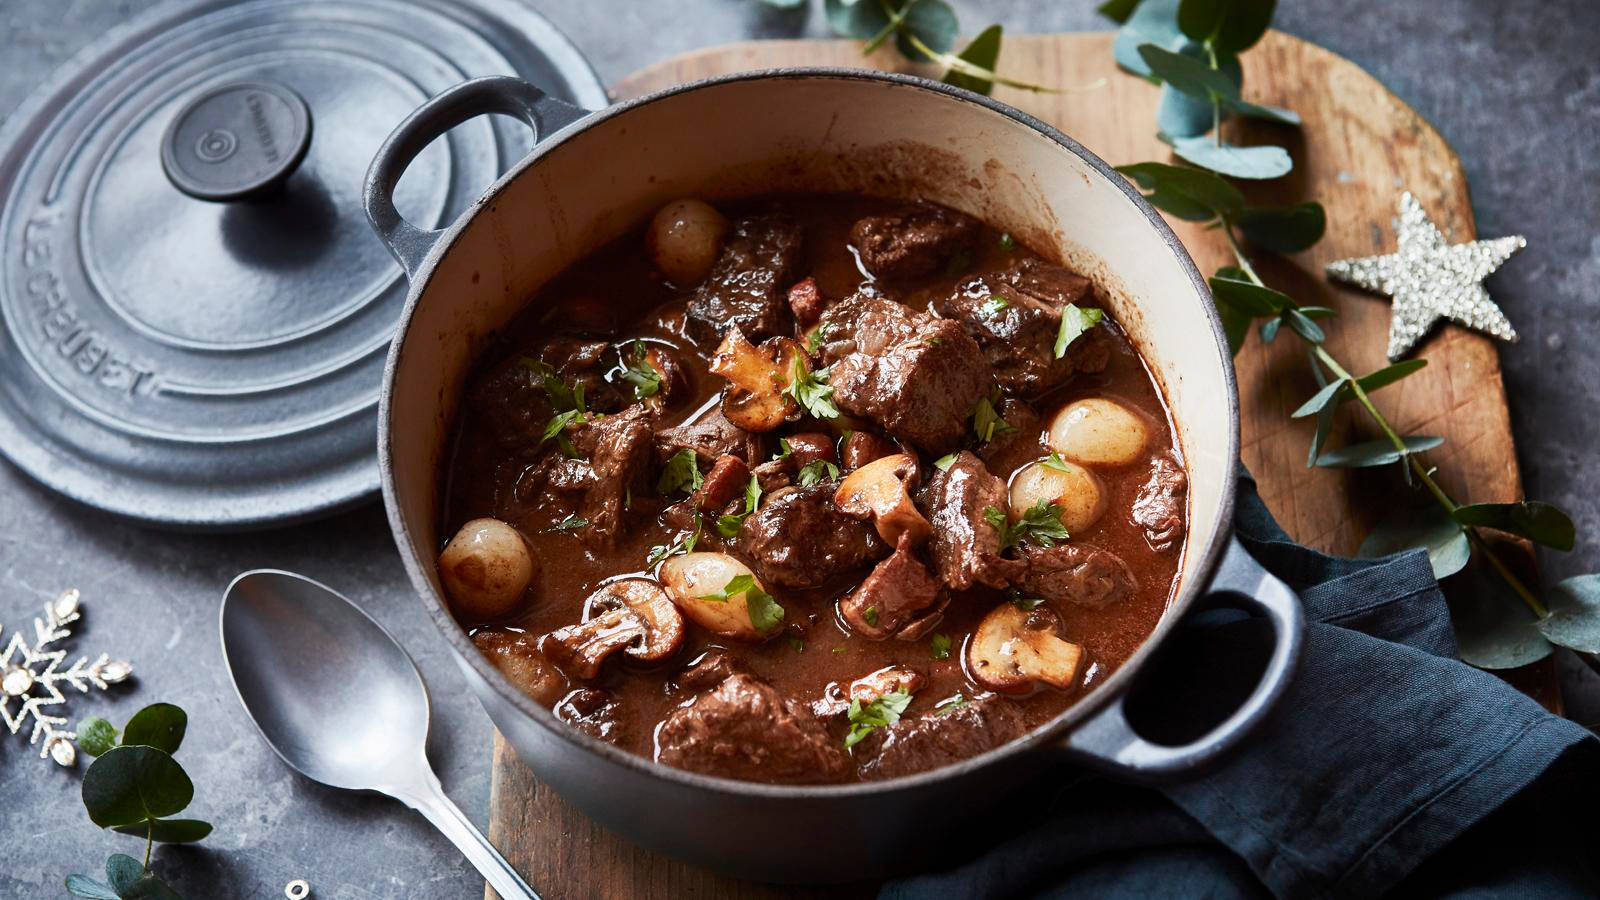 Sorry,this Phrase (beef Bourguignon Champignon Mushroom) Does Not Make Sense And Cannot Be Accurately Translated. Can You Please Provide A Valid Phrase Or Sentence To Be Translated? Thank You. Wallpaper